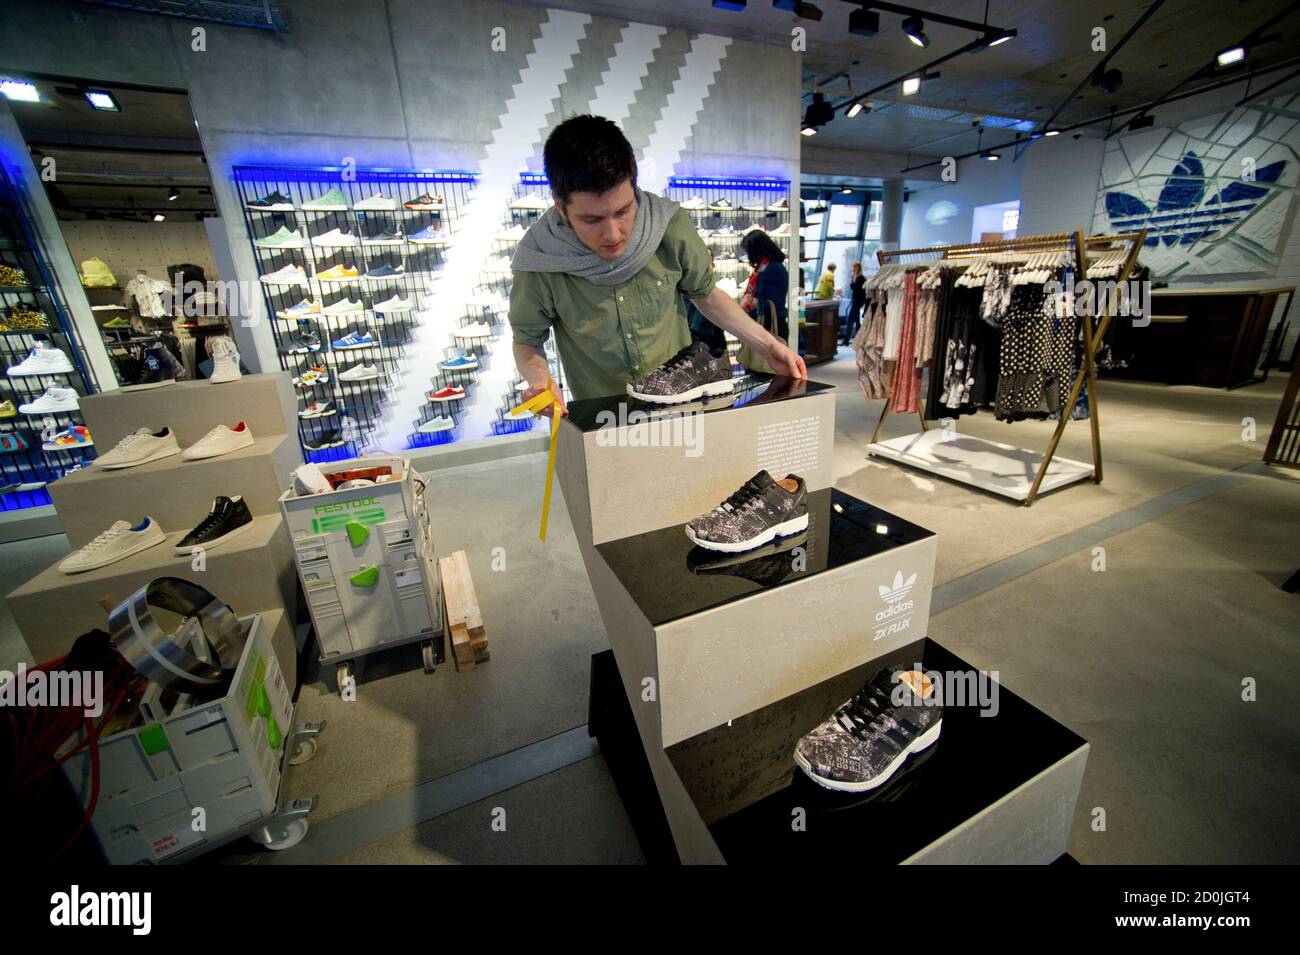 A worker prepares for opening at the new Adidas Originals store in Berlin March 27, 2014. Adidas has launched a new store blueprint for its Originals fashion brand with a Wi-Fi